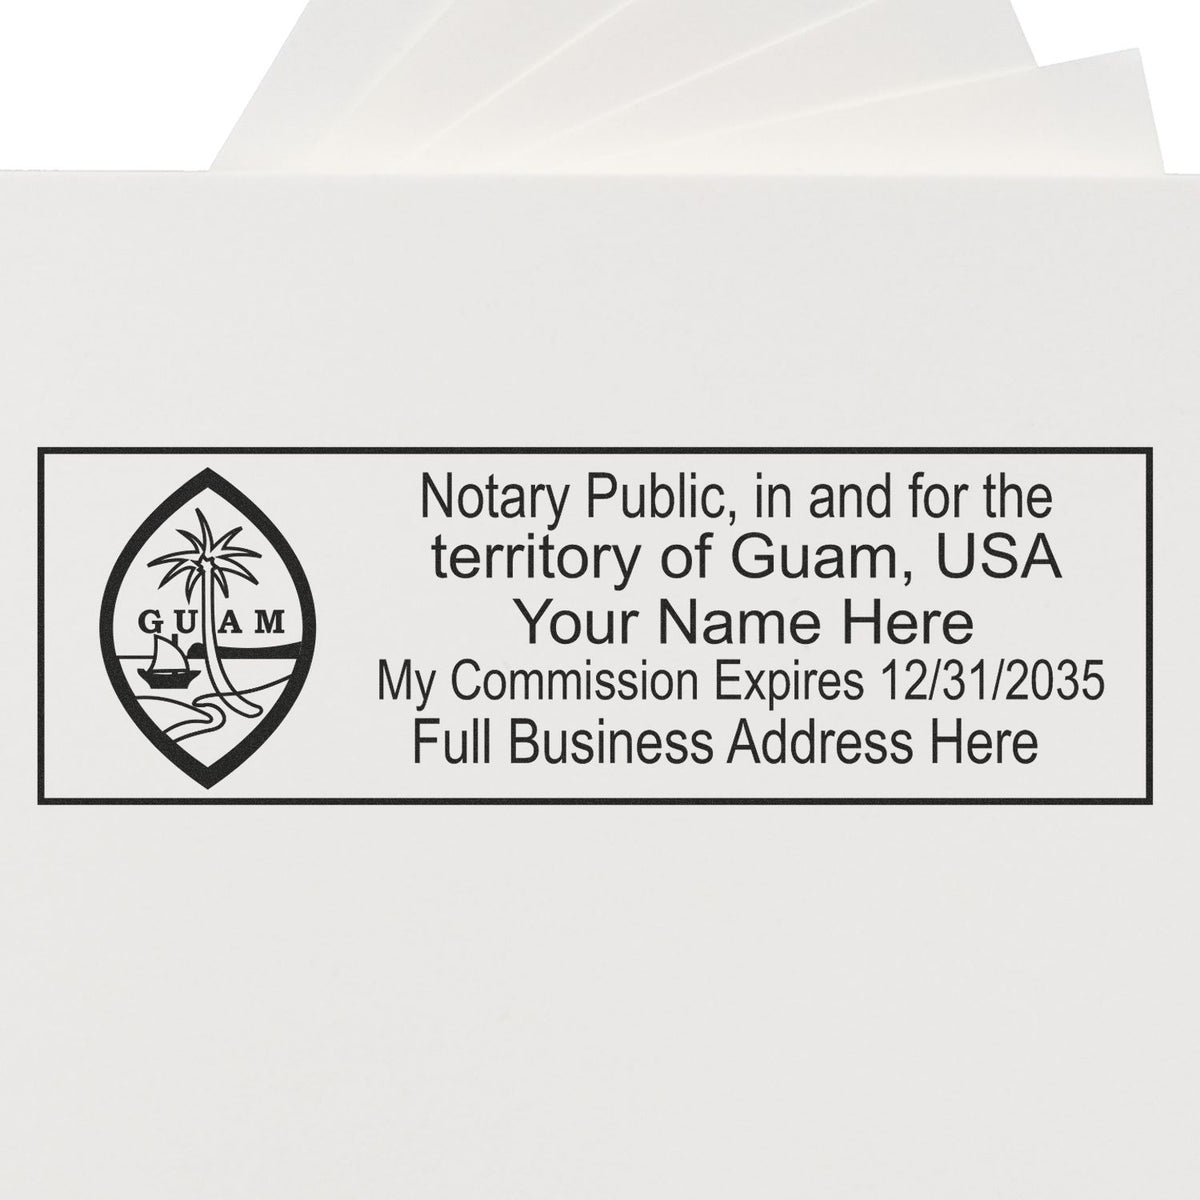 The PSI Guam Notary Stamp stamp impression comes to life with a crisp, detailed photo on paper - showcasing true professional quality.